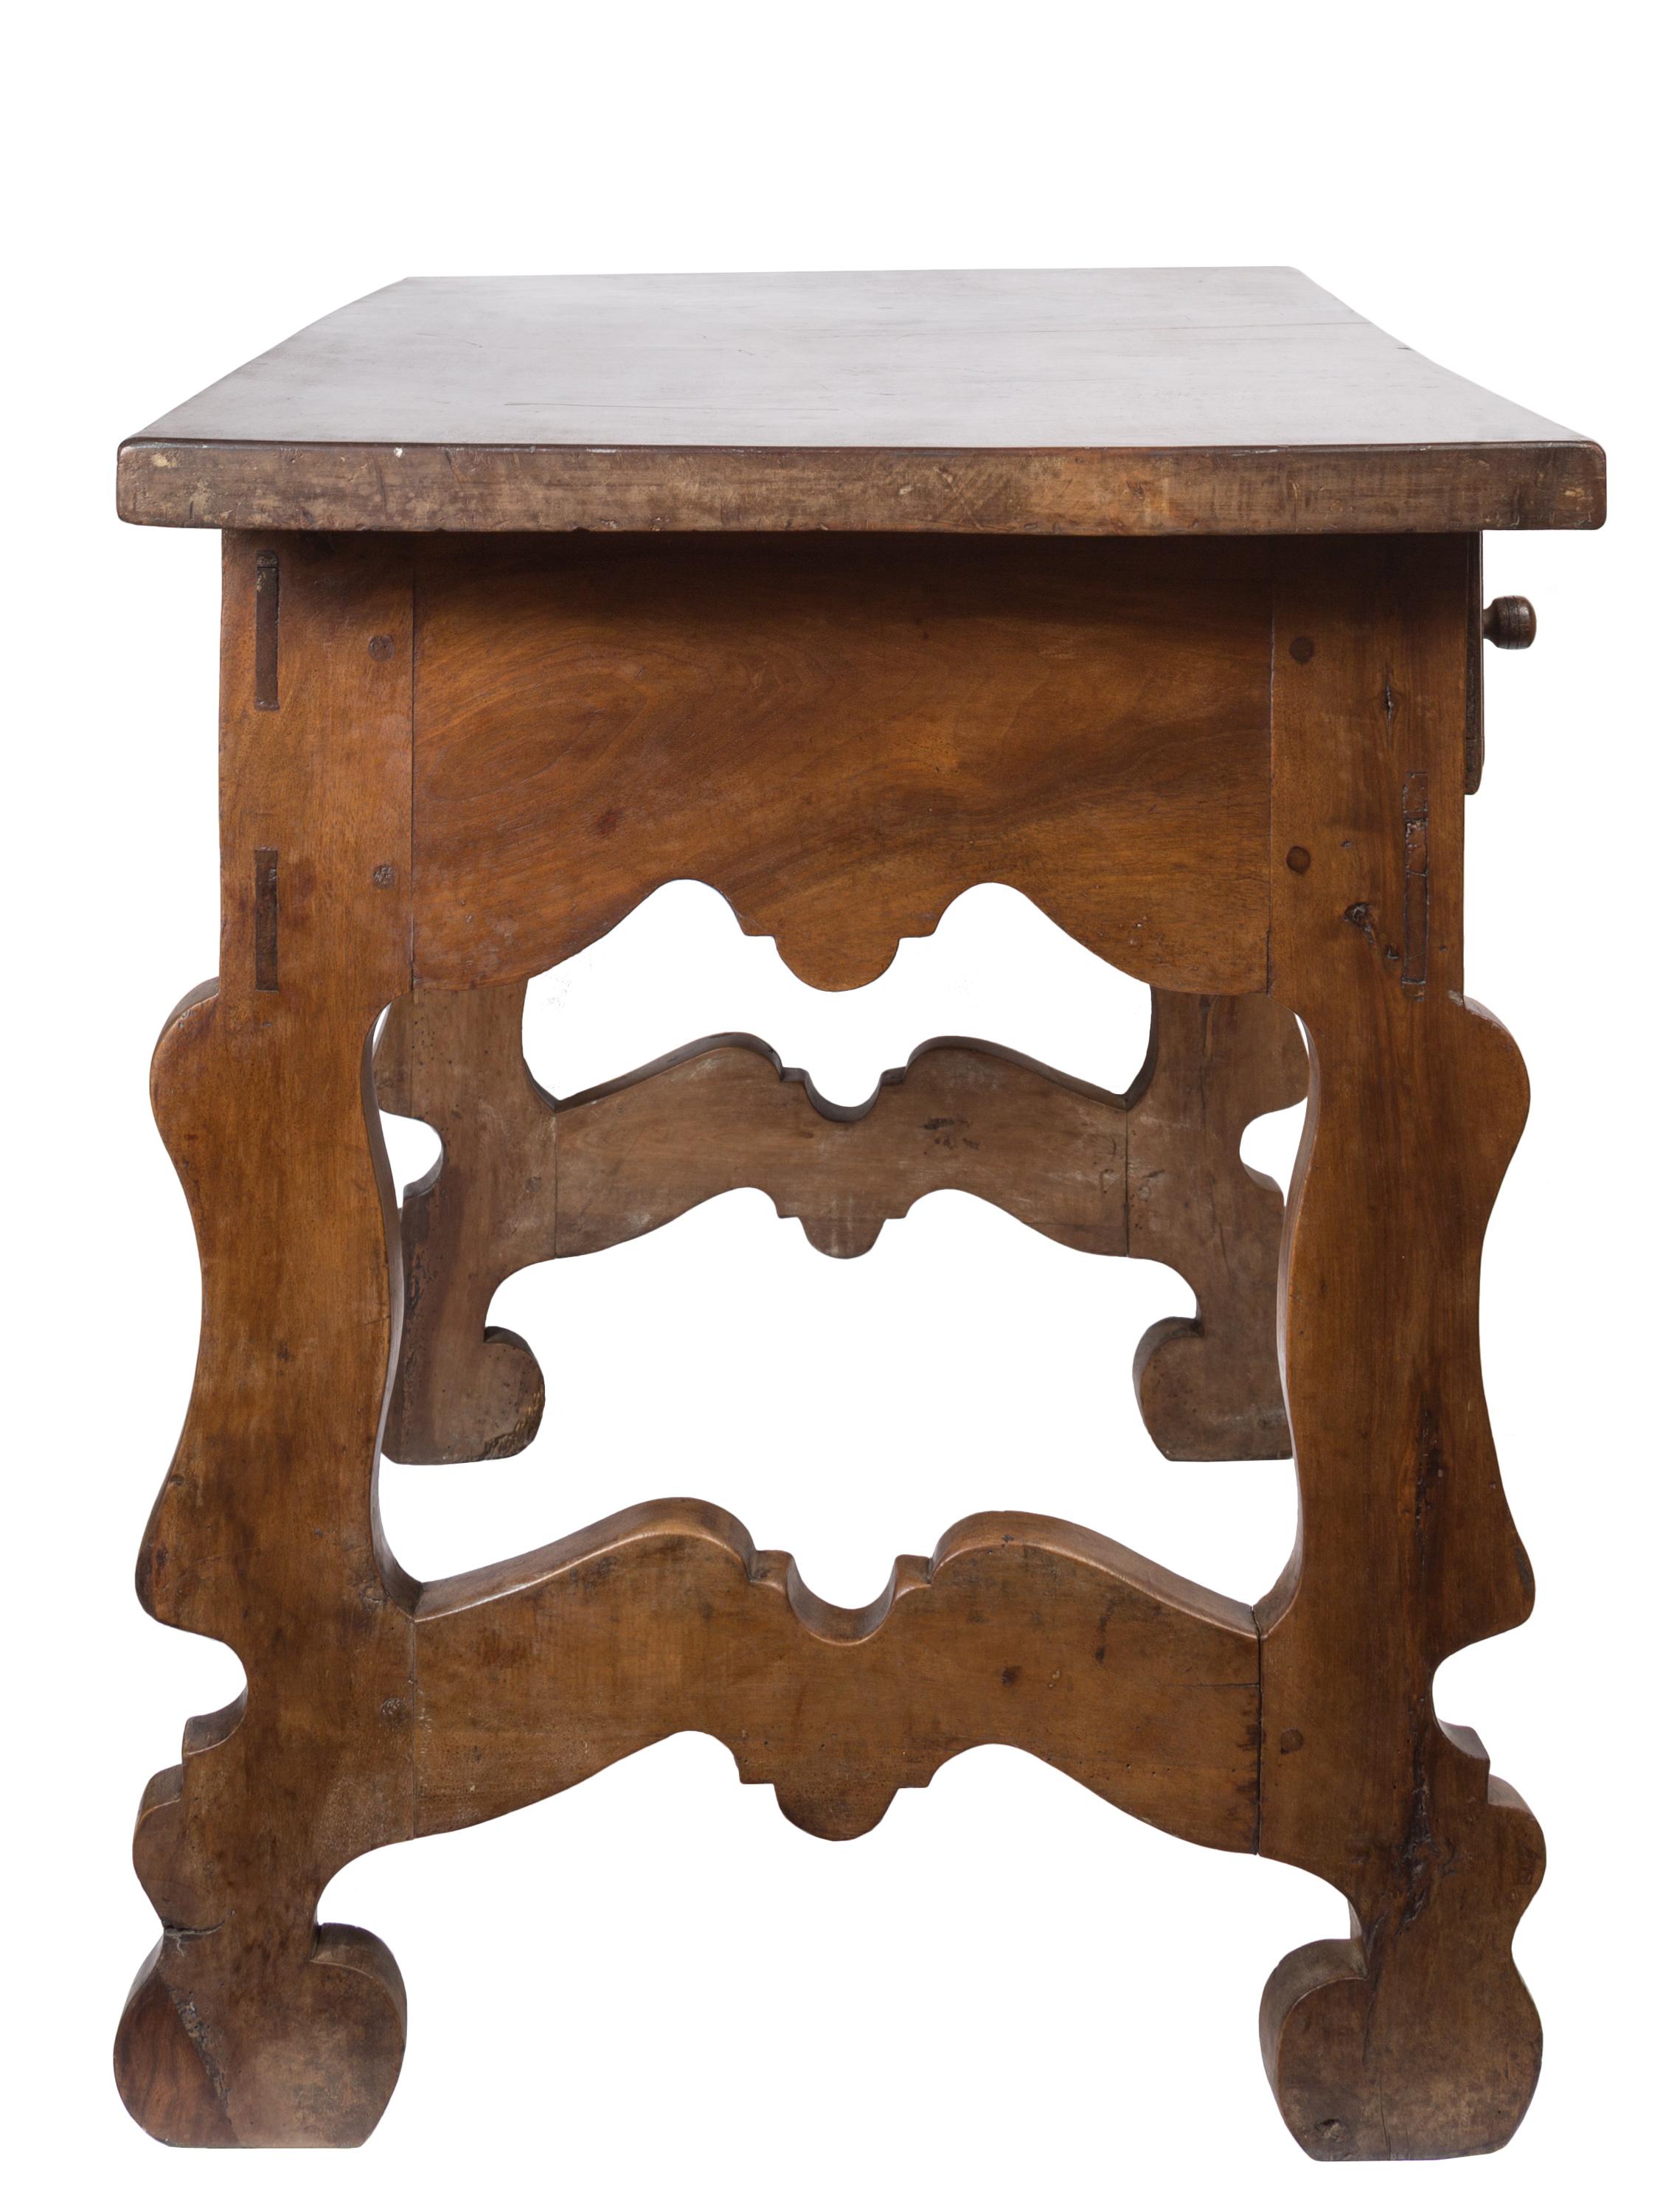 Carved 17th Century Rustic Wood Spanish Writing Table with Three Drawers